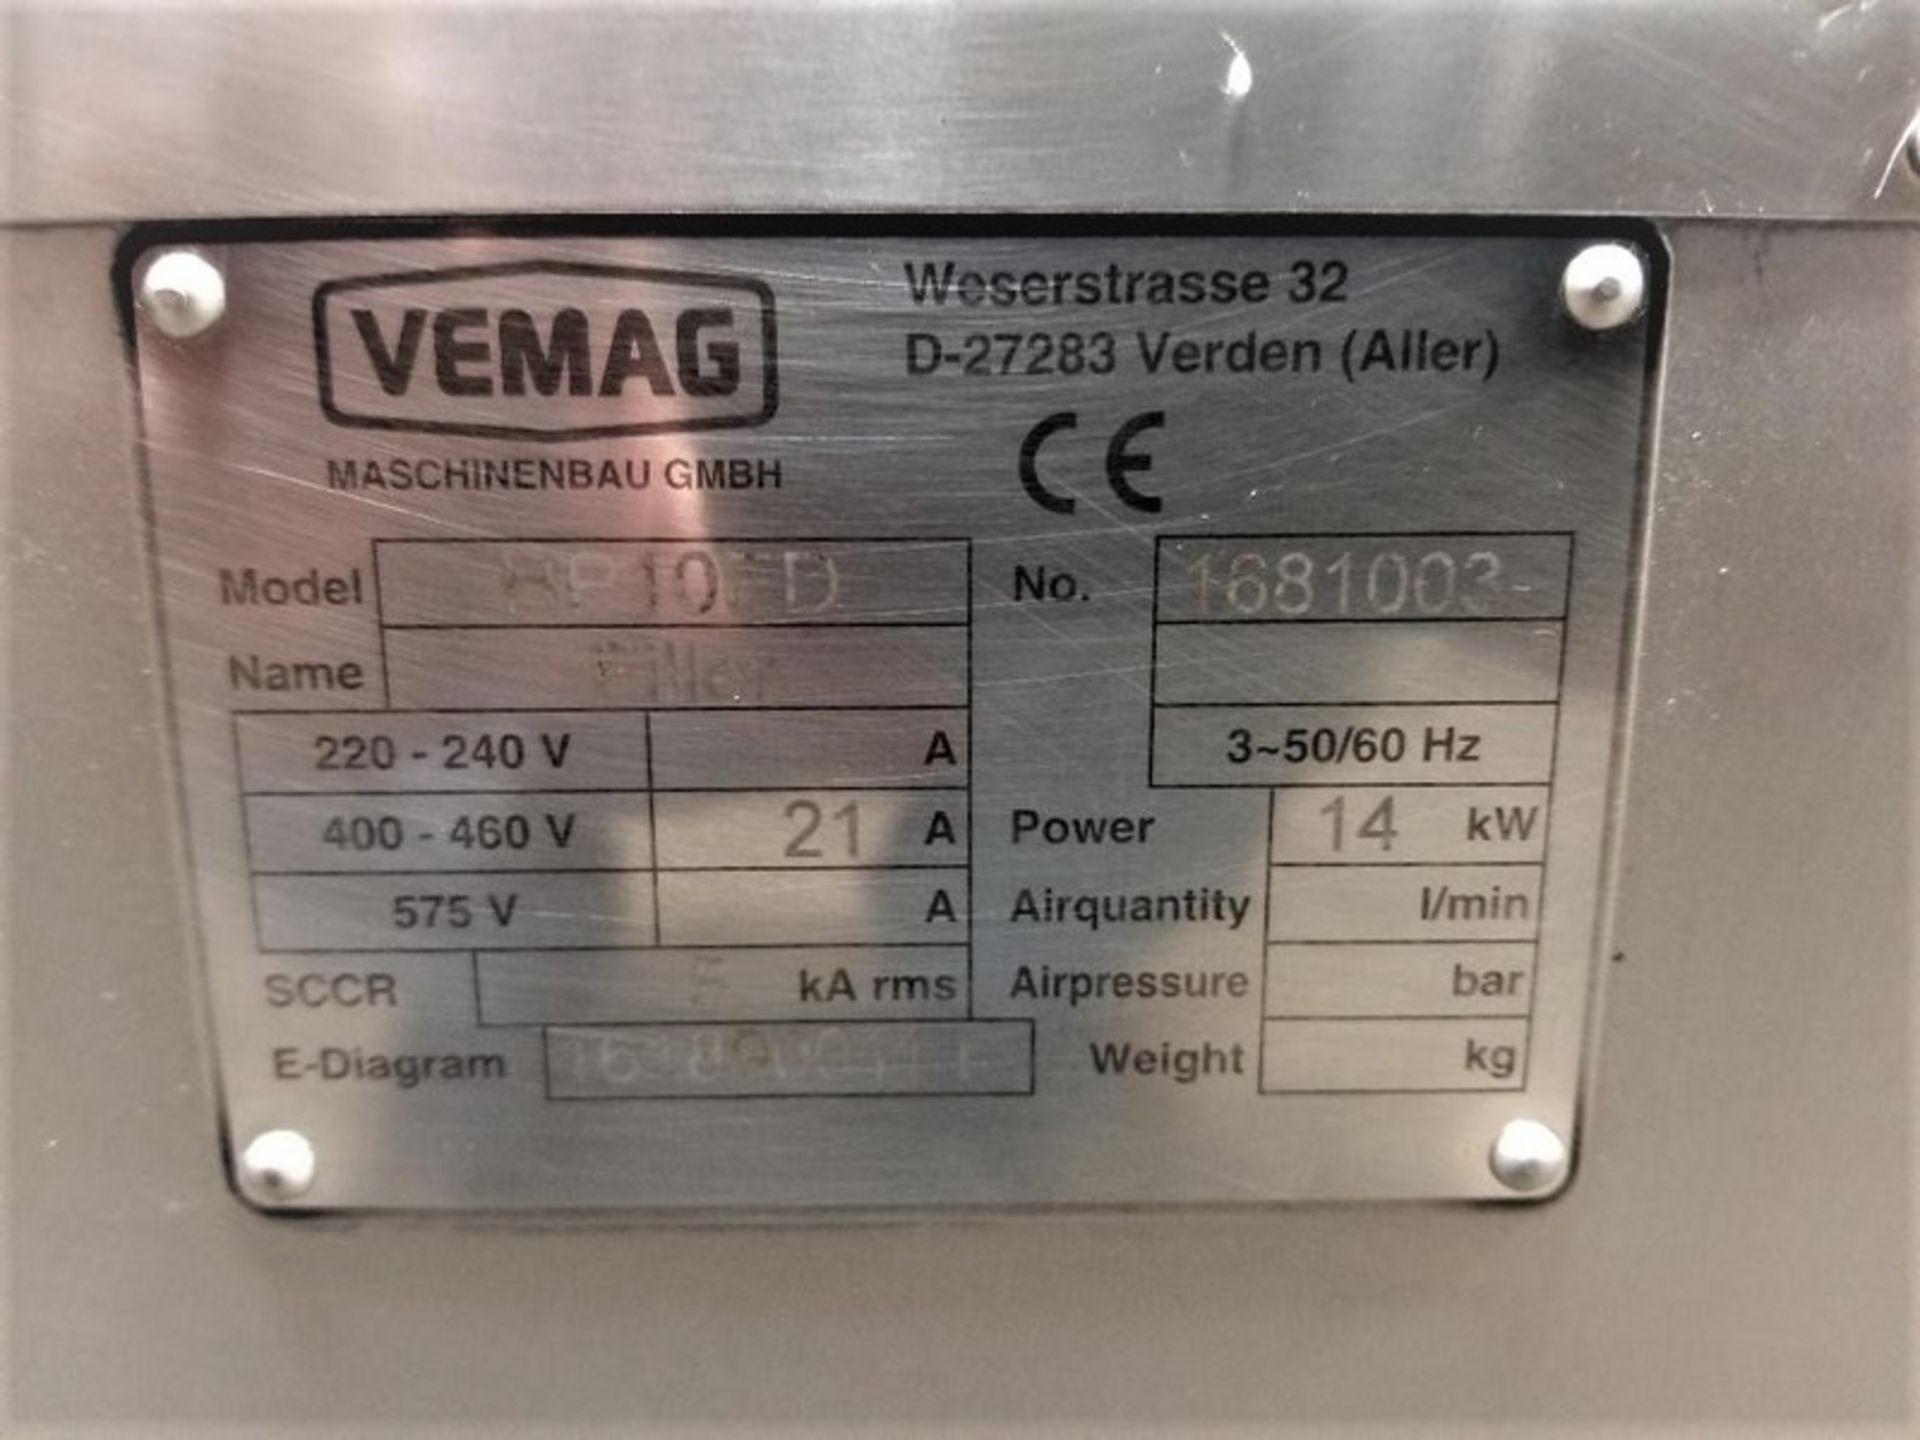 Vemag Robot HP10ED Vacuum Filler, S/N 1681003, Mfg. 2013 -- This system was just removed from the - Image 12 of 15